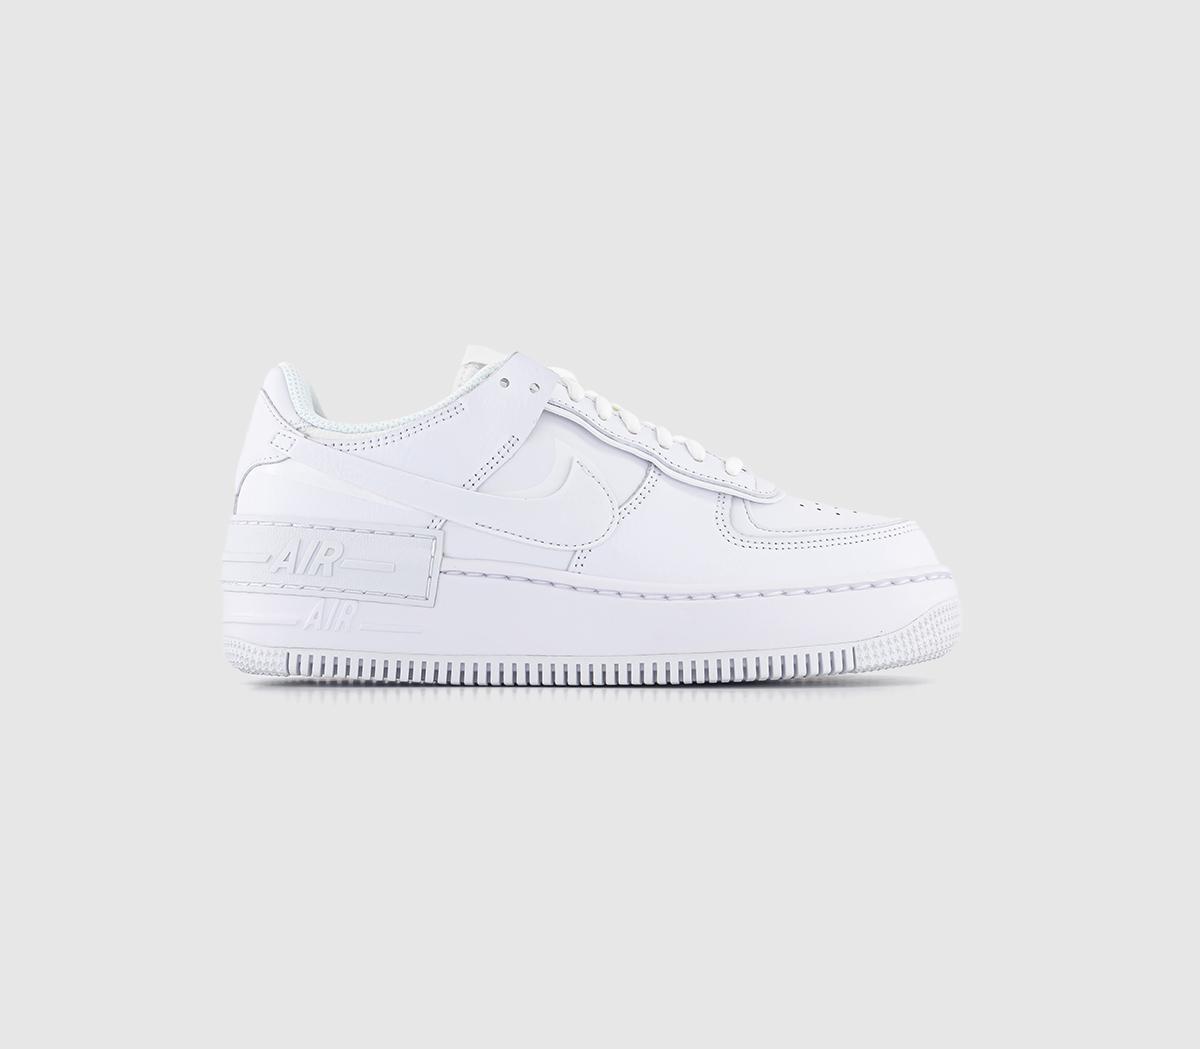 revolutie Okkernoot as Nike Air Force 1 Shadow Trainers White Mono - Unisex Sports